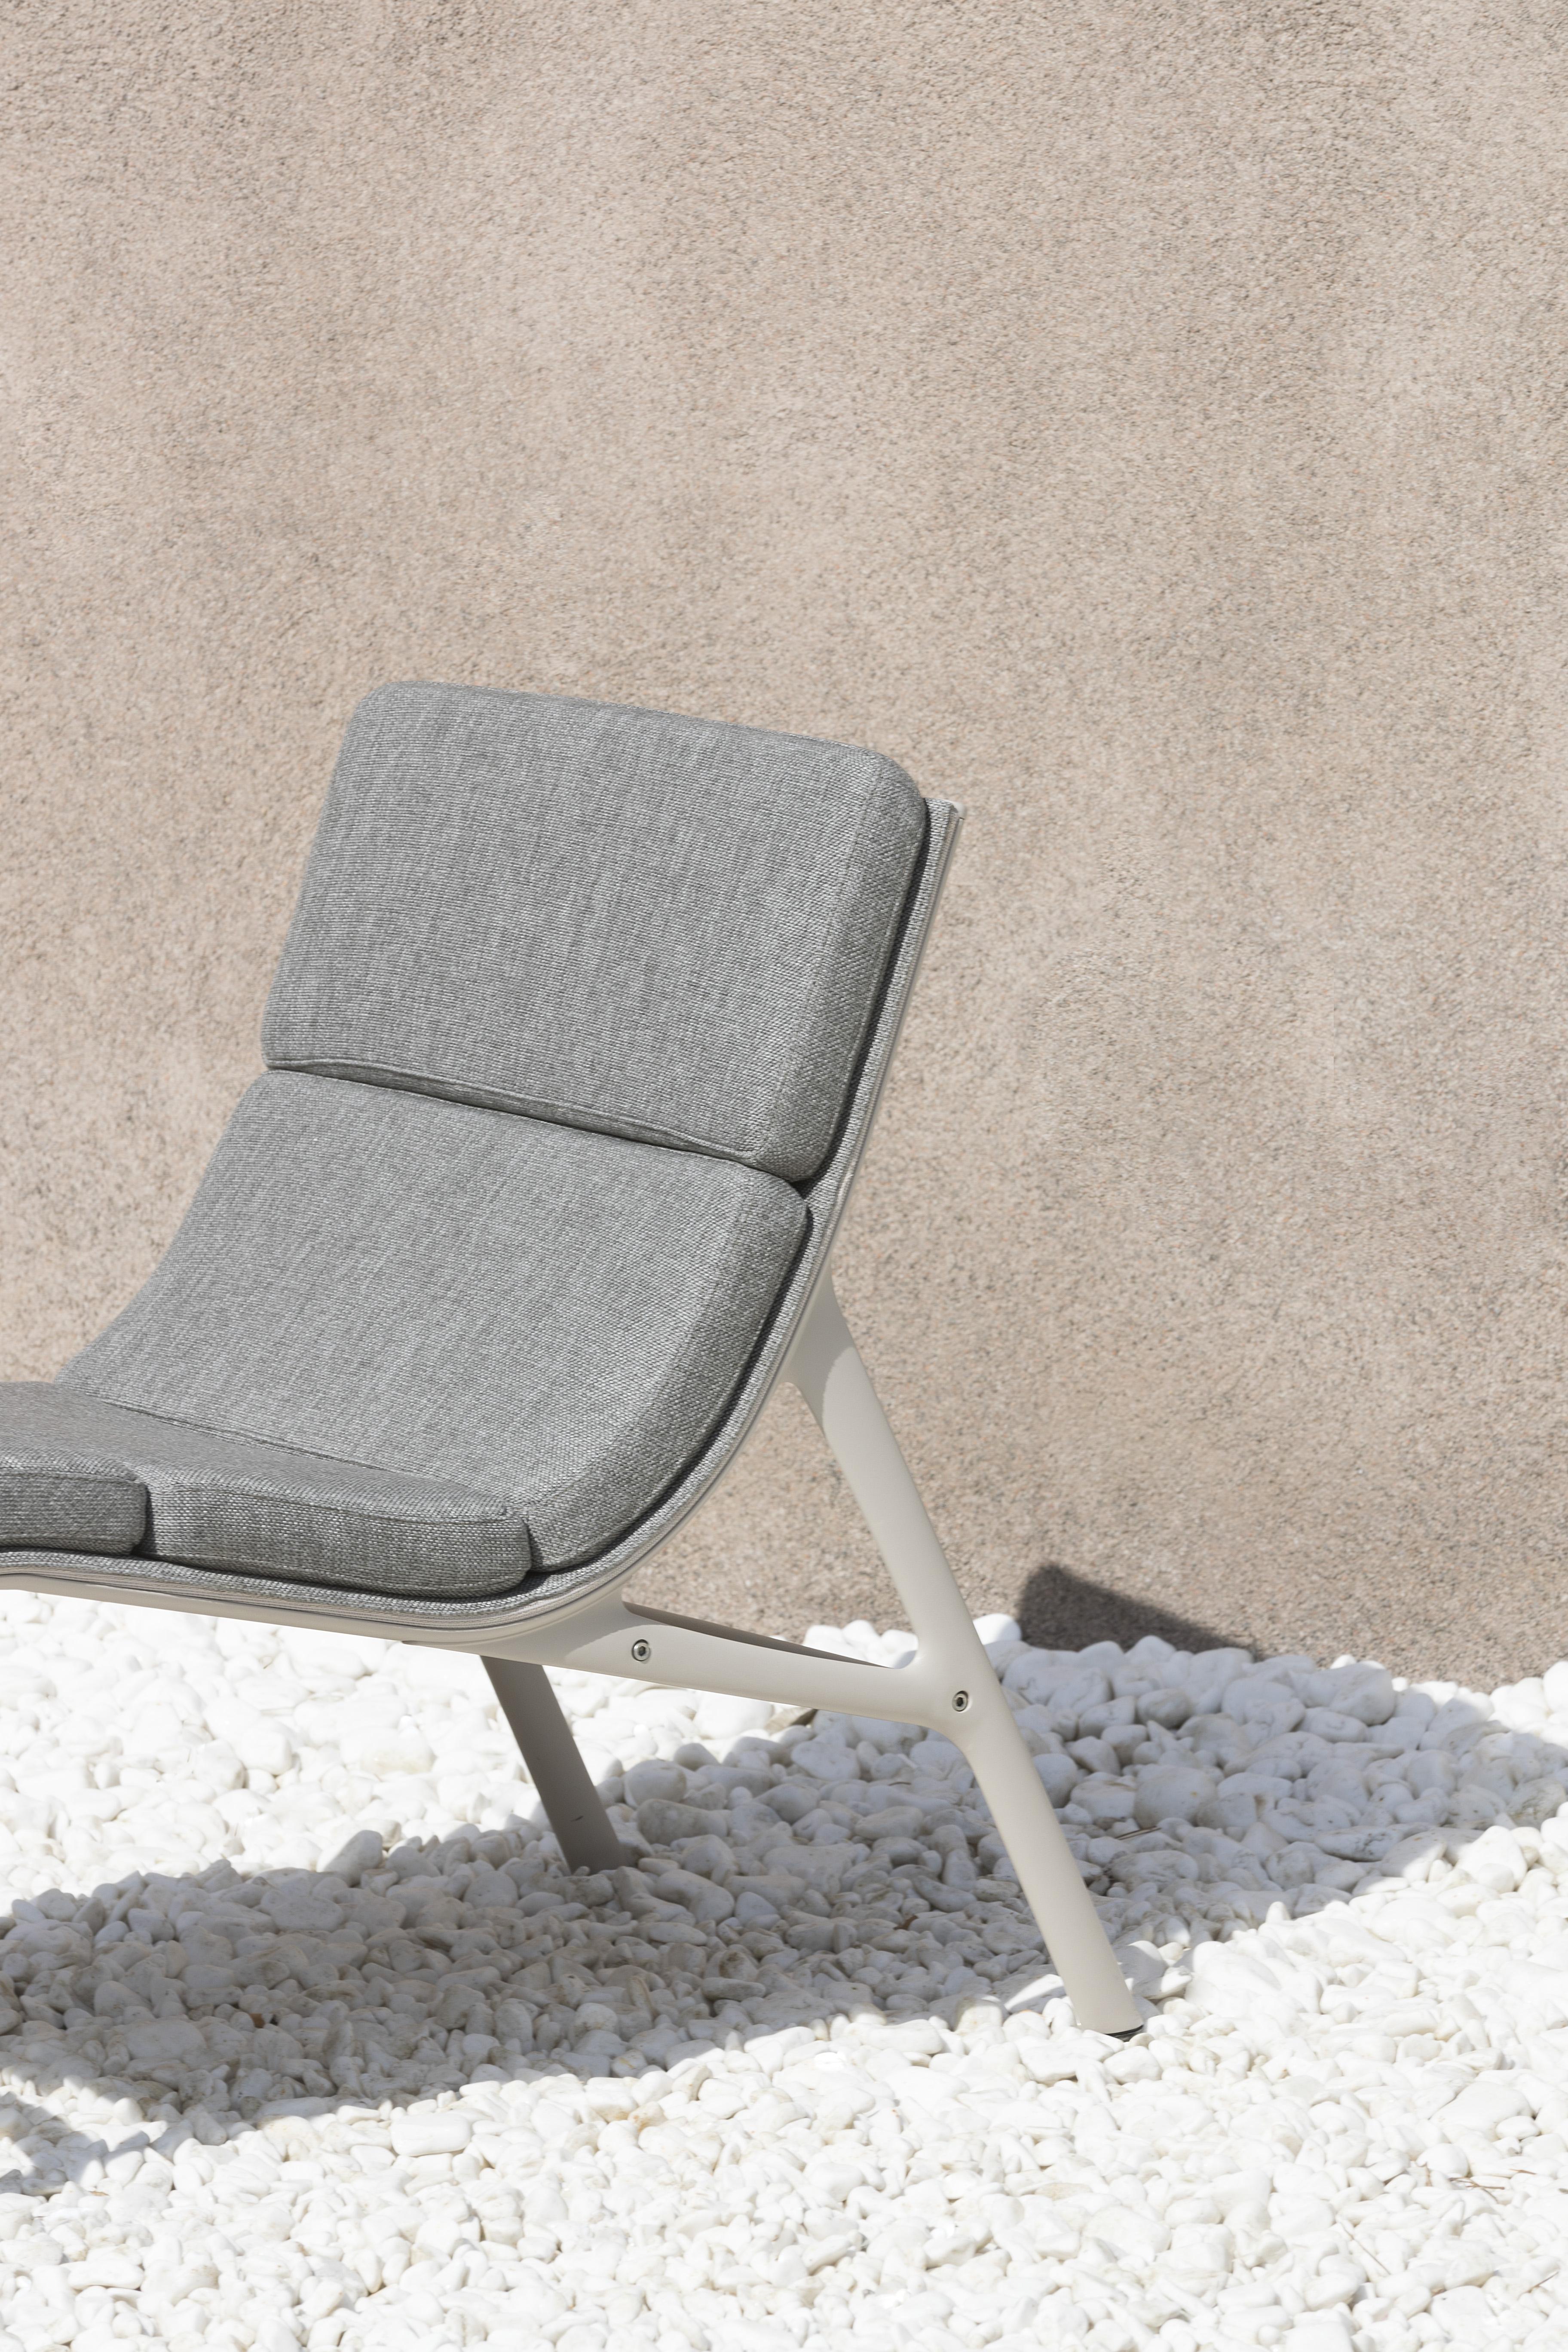 Aluminum Alias 462 Armframe Soft Chair in Sand Mesh and Grey Seat with Lacquered Frame For Sale